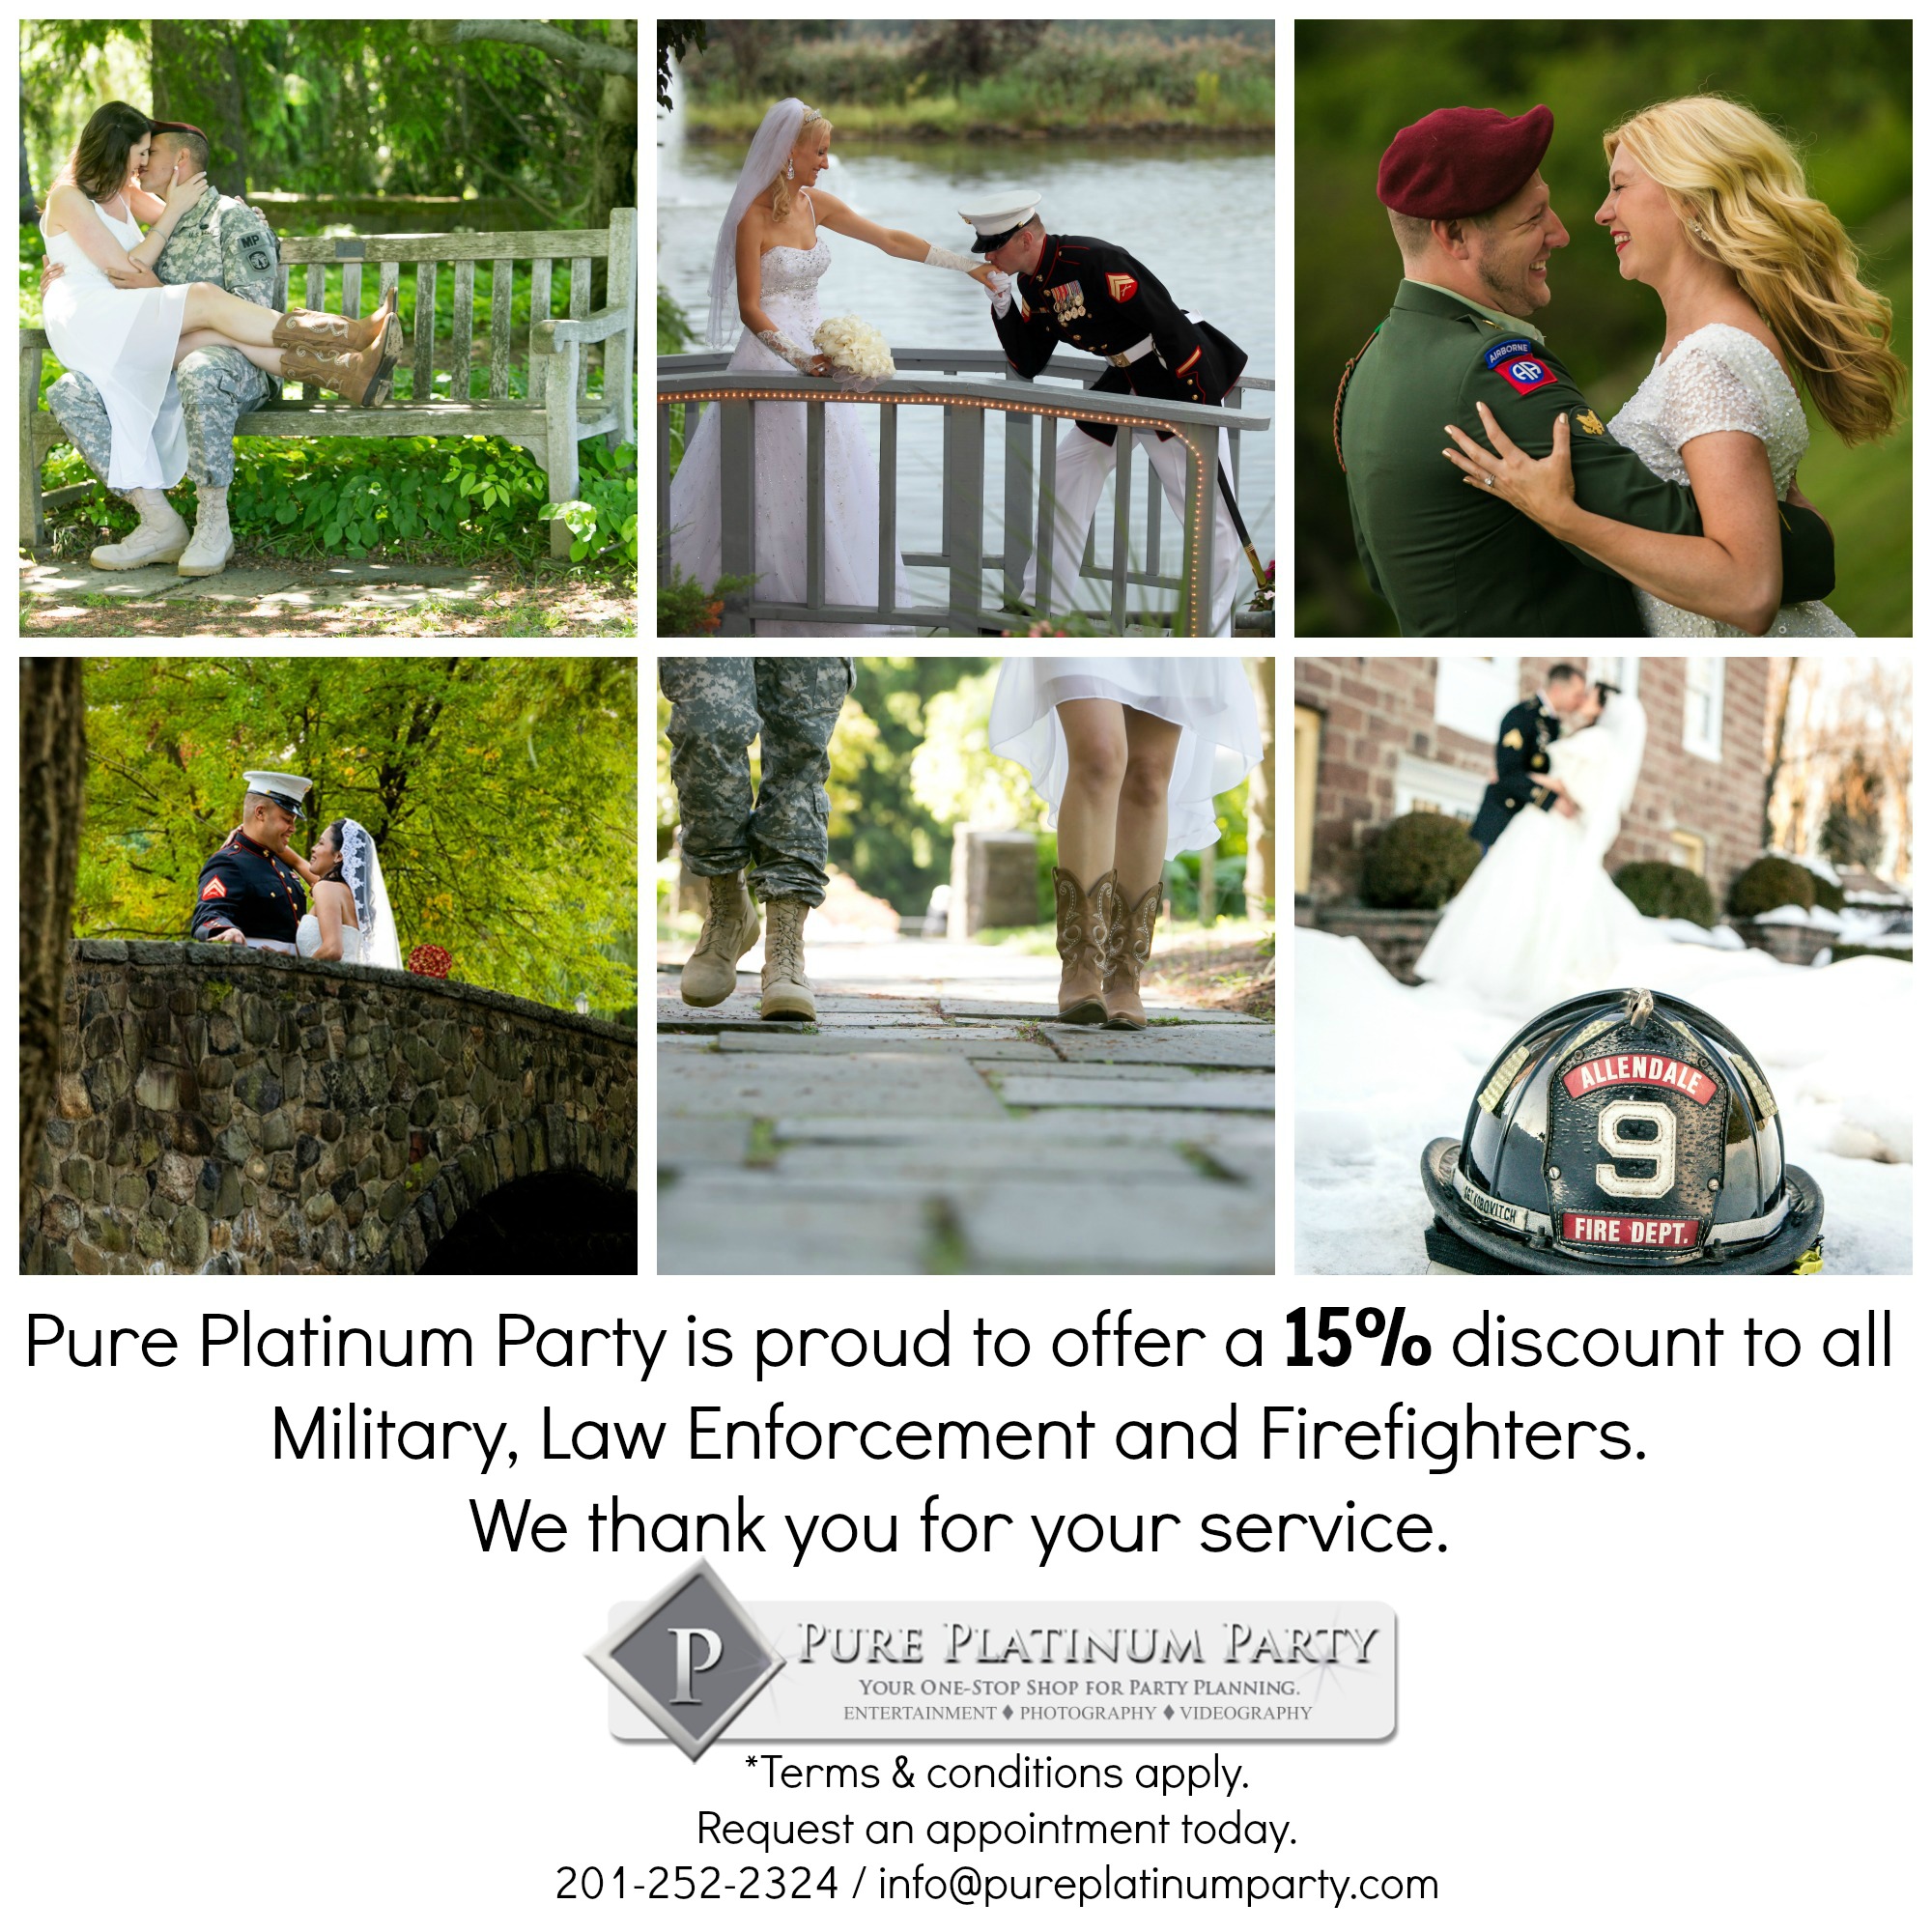 Proudly Offering a 15% Discount to All Military, Law Enforcement, and Firefighters